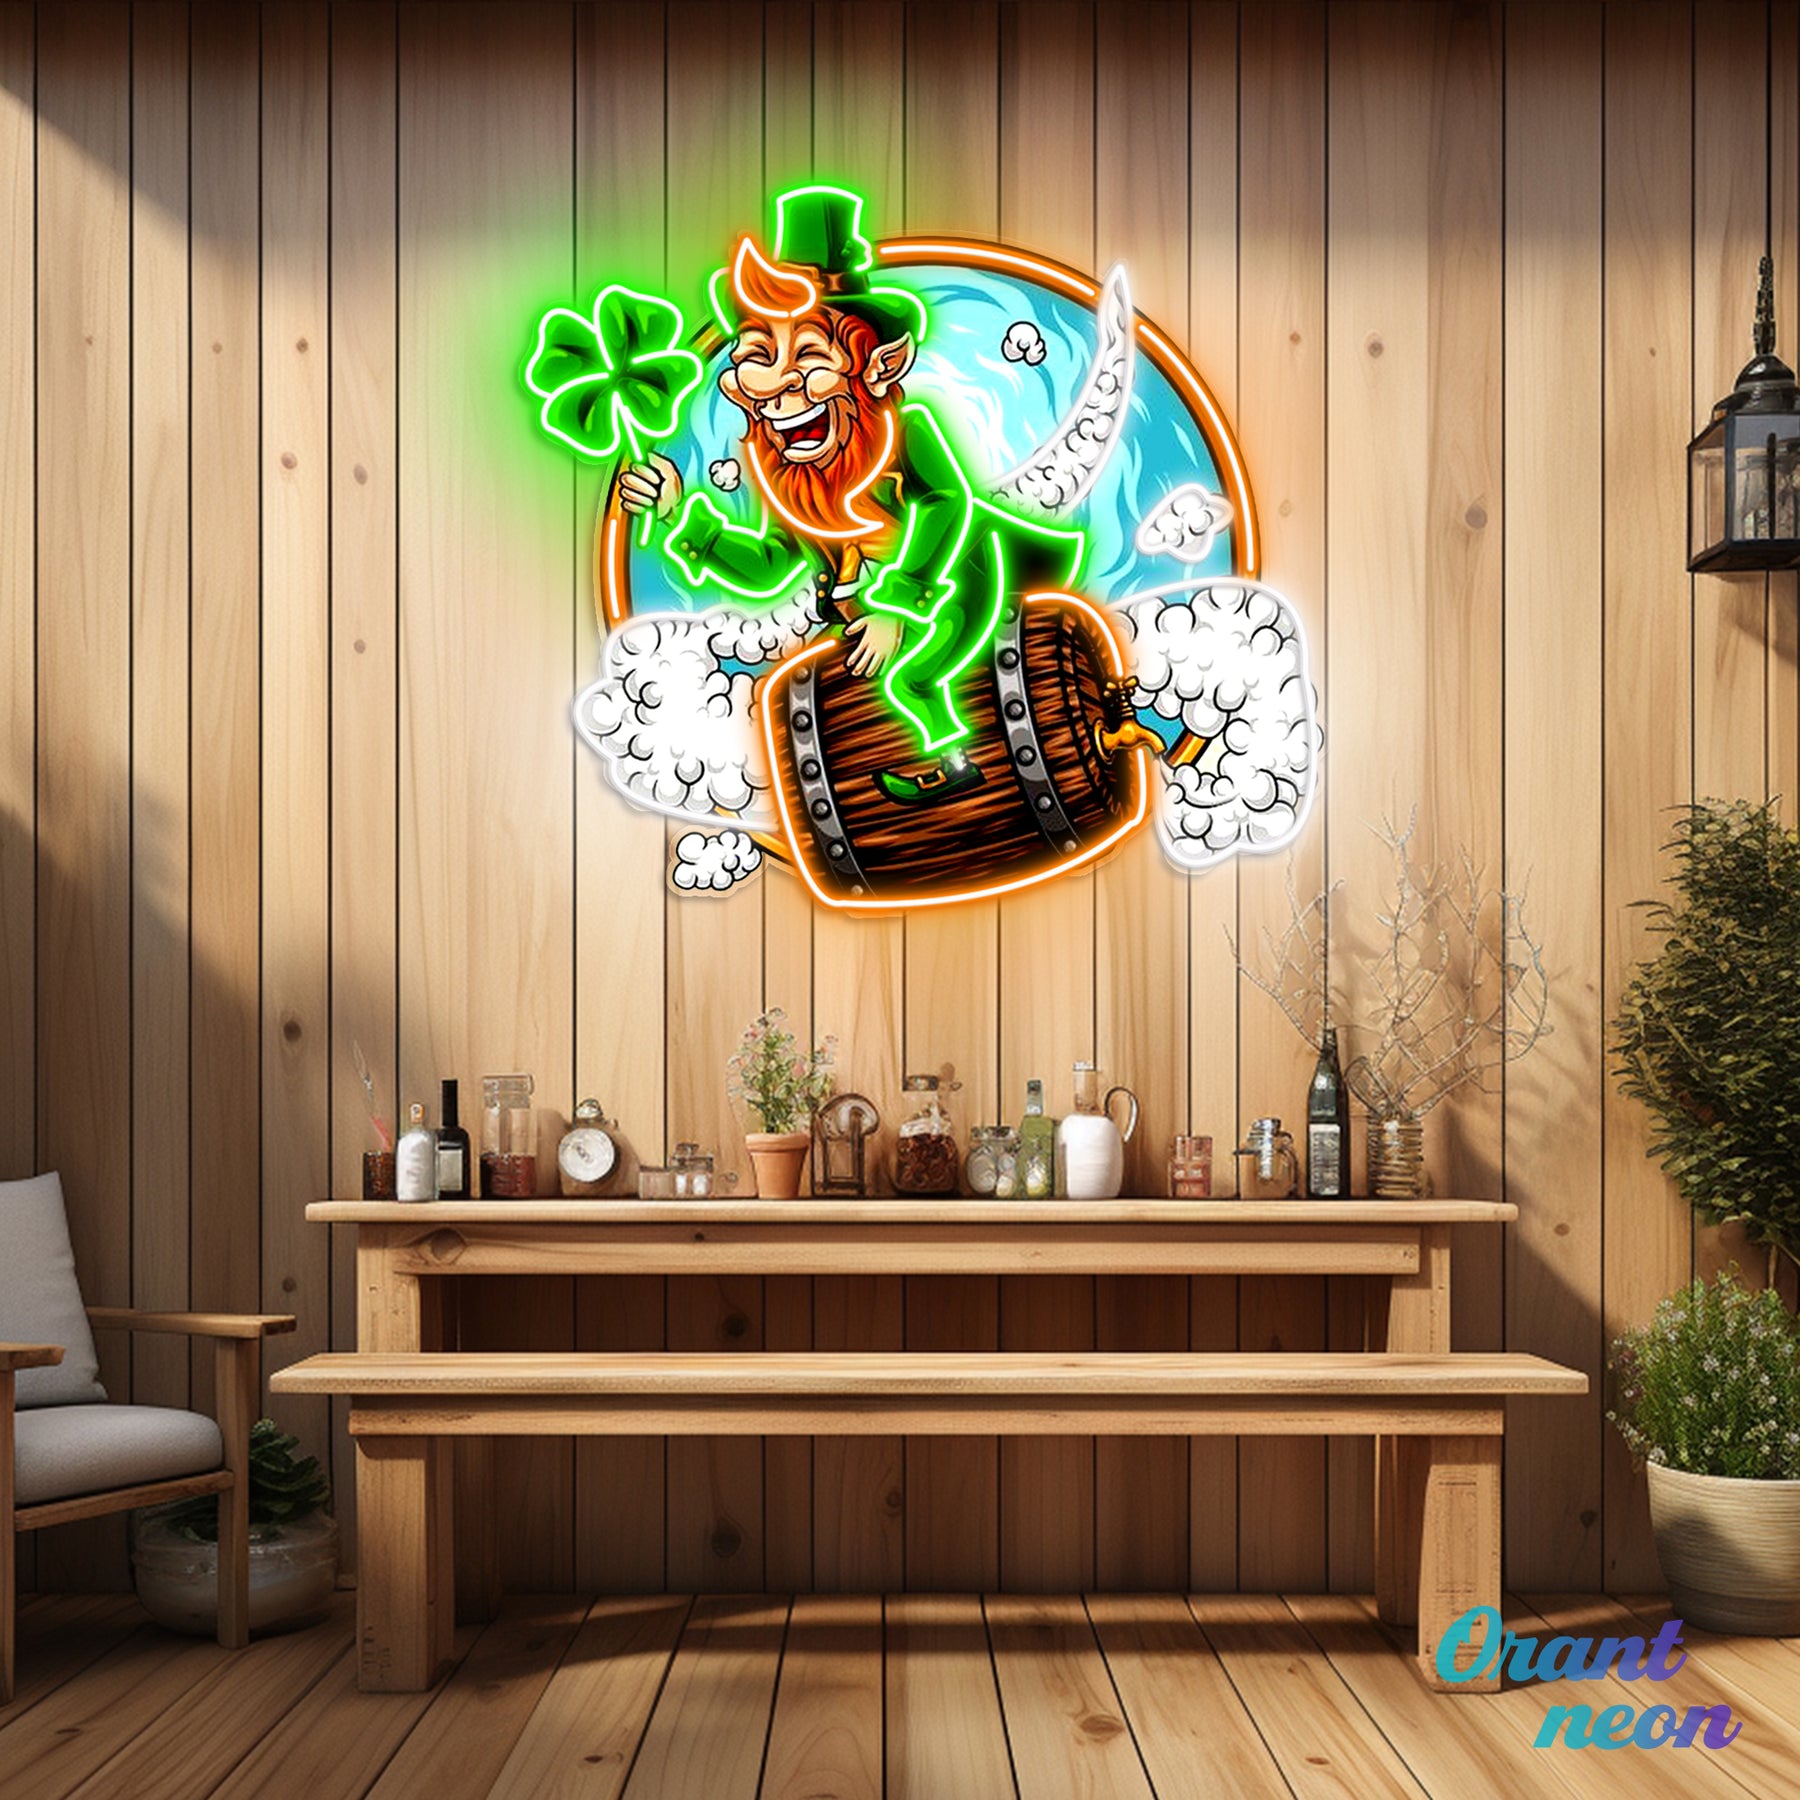 Patrick's Day Goblin Flying On A Wine Valley Holding A Four Leaf Clover Led Neon Acrylic Artwork